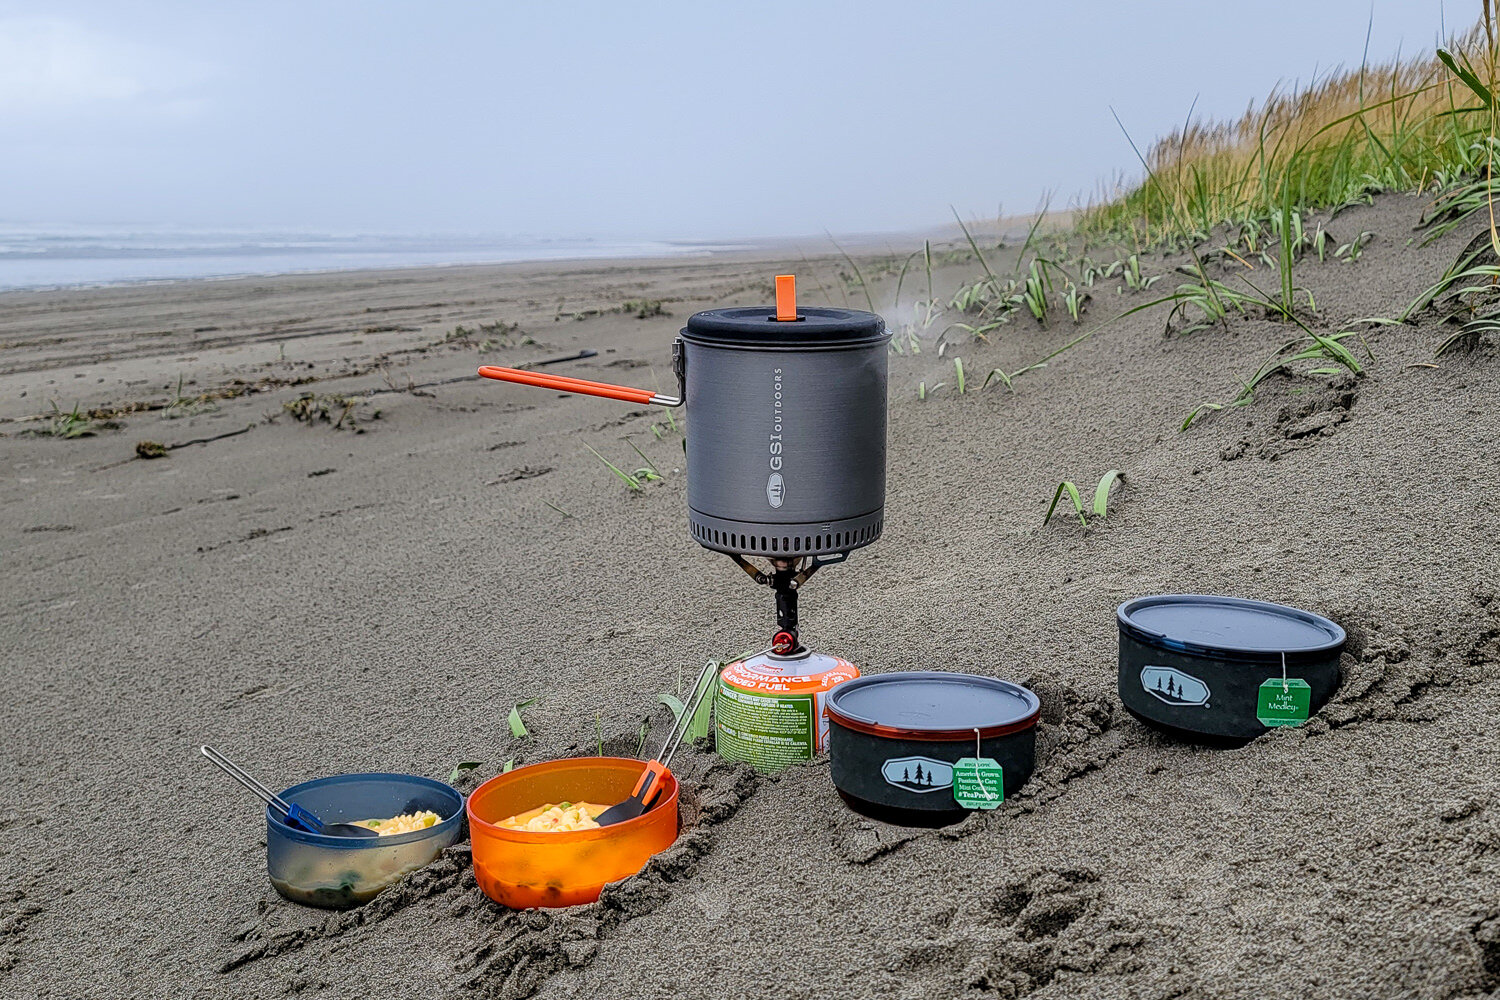 The GSI Outdoors Pinnacle Dualist HS Cookset is efficicent for heating large amounts of water for groups of 2-4